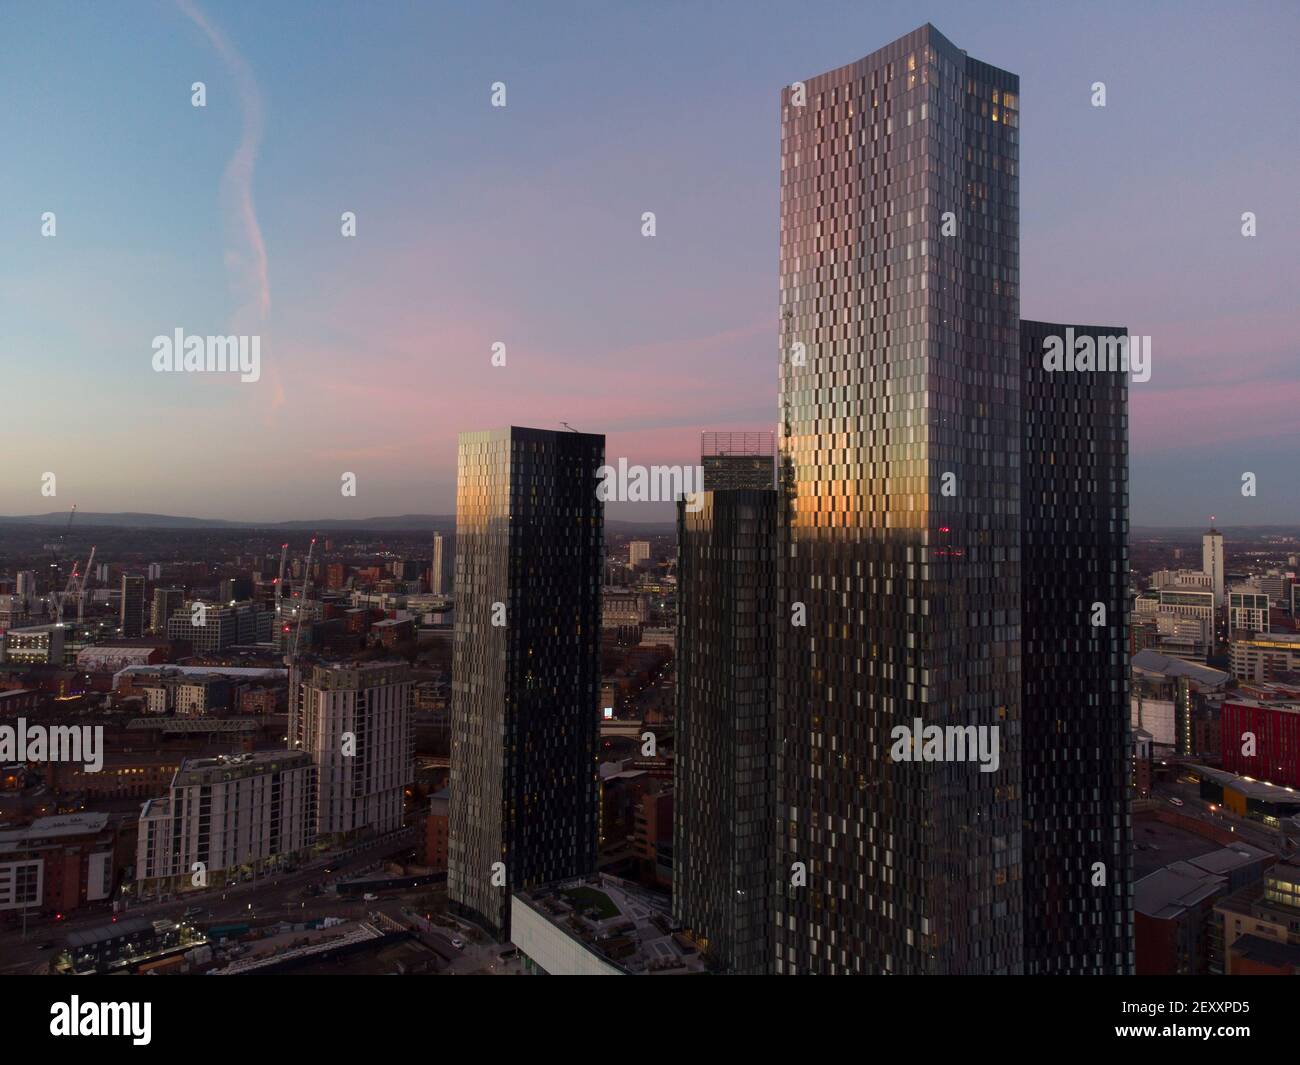 Manchester, UK, 26th Feb 2021. Picture shows the Deansgate Square development on Owen Street in Manchester City Centre including the South Tower the tallest building in the city, Manchester, Britain Feb. 26, 2021. The cityÕs changing skyline of skyscrapers has been compared by some to that of Manhattan earnong the the nickname Manchattan. Manchester, UK. Credit: Jon Super/Alamy. Stock Photo